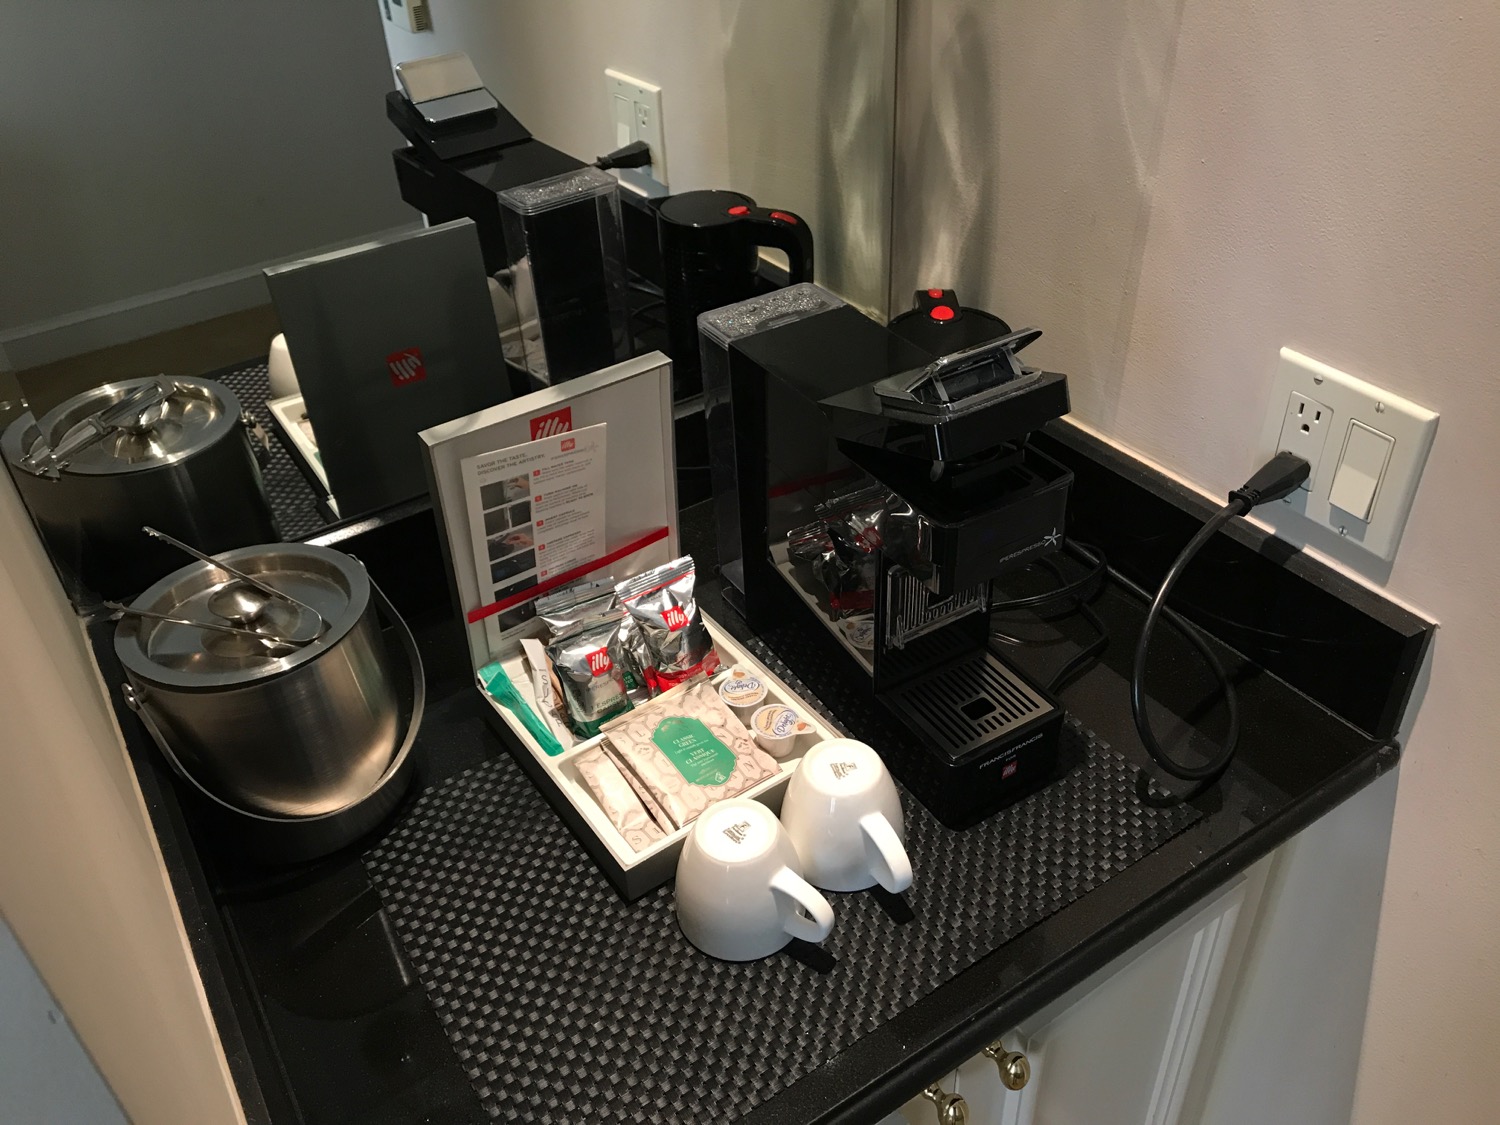 a coffee machine and tea cups on a counter